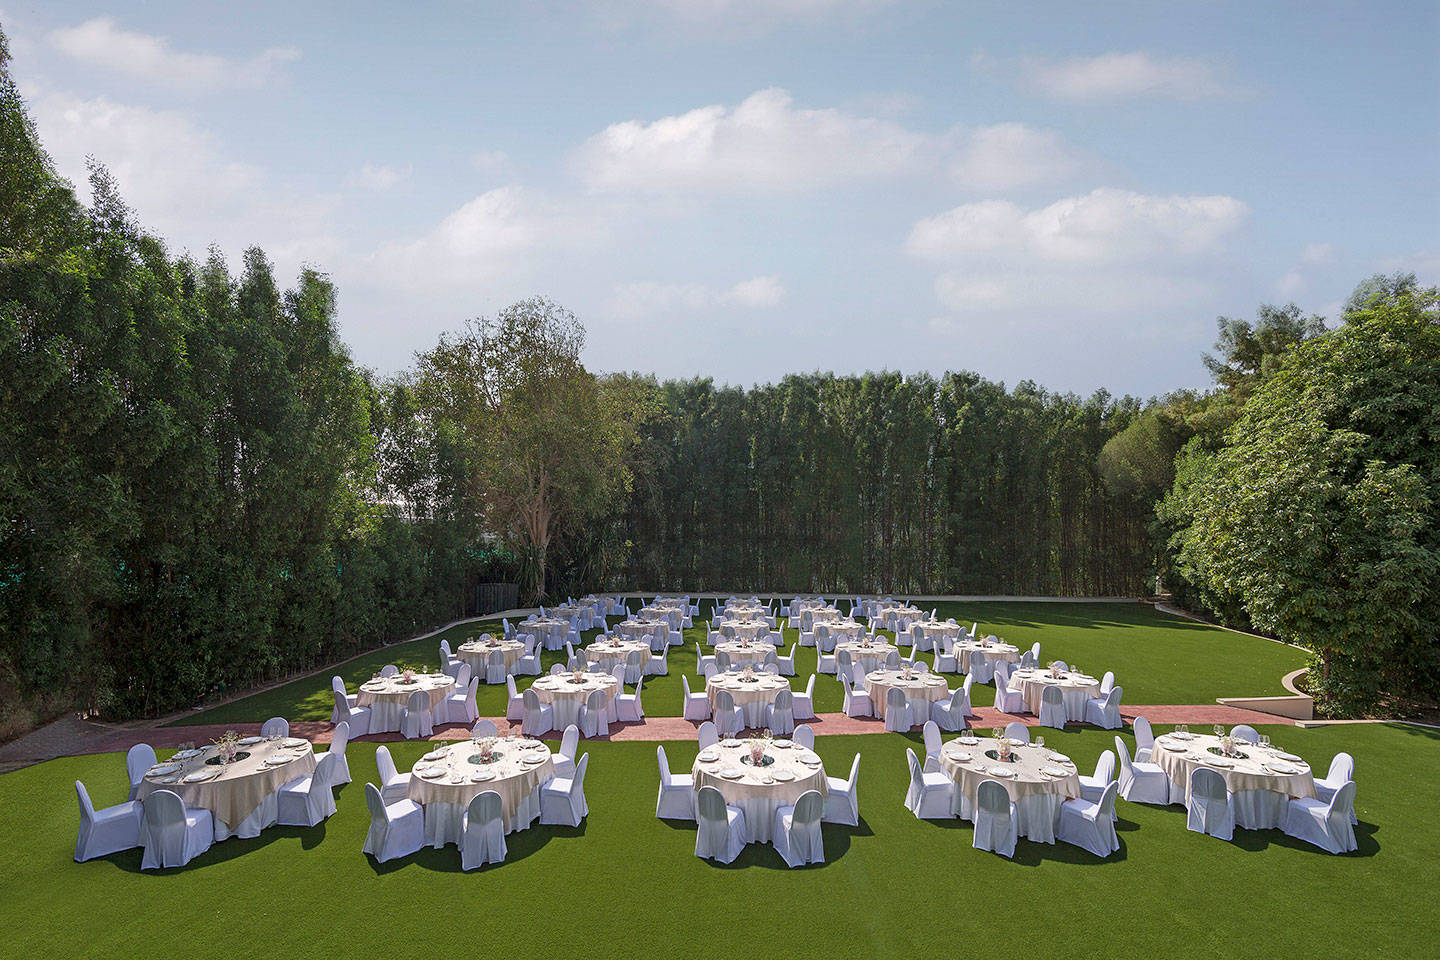 Tables set up on lawn for event at Jumeirah Creekside Hotel